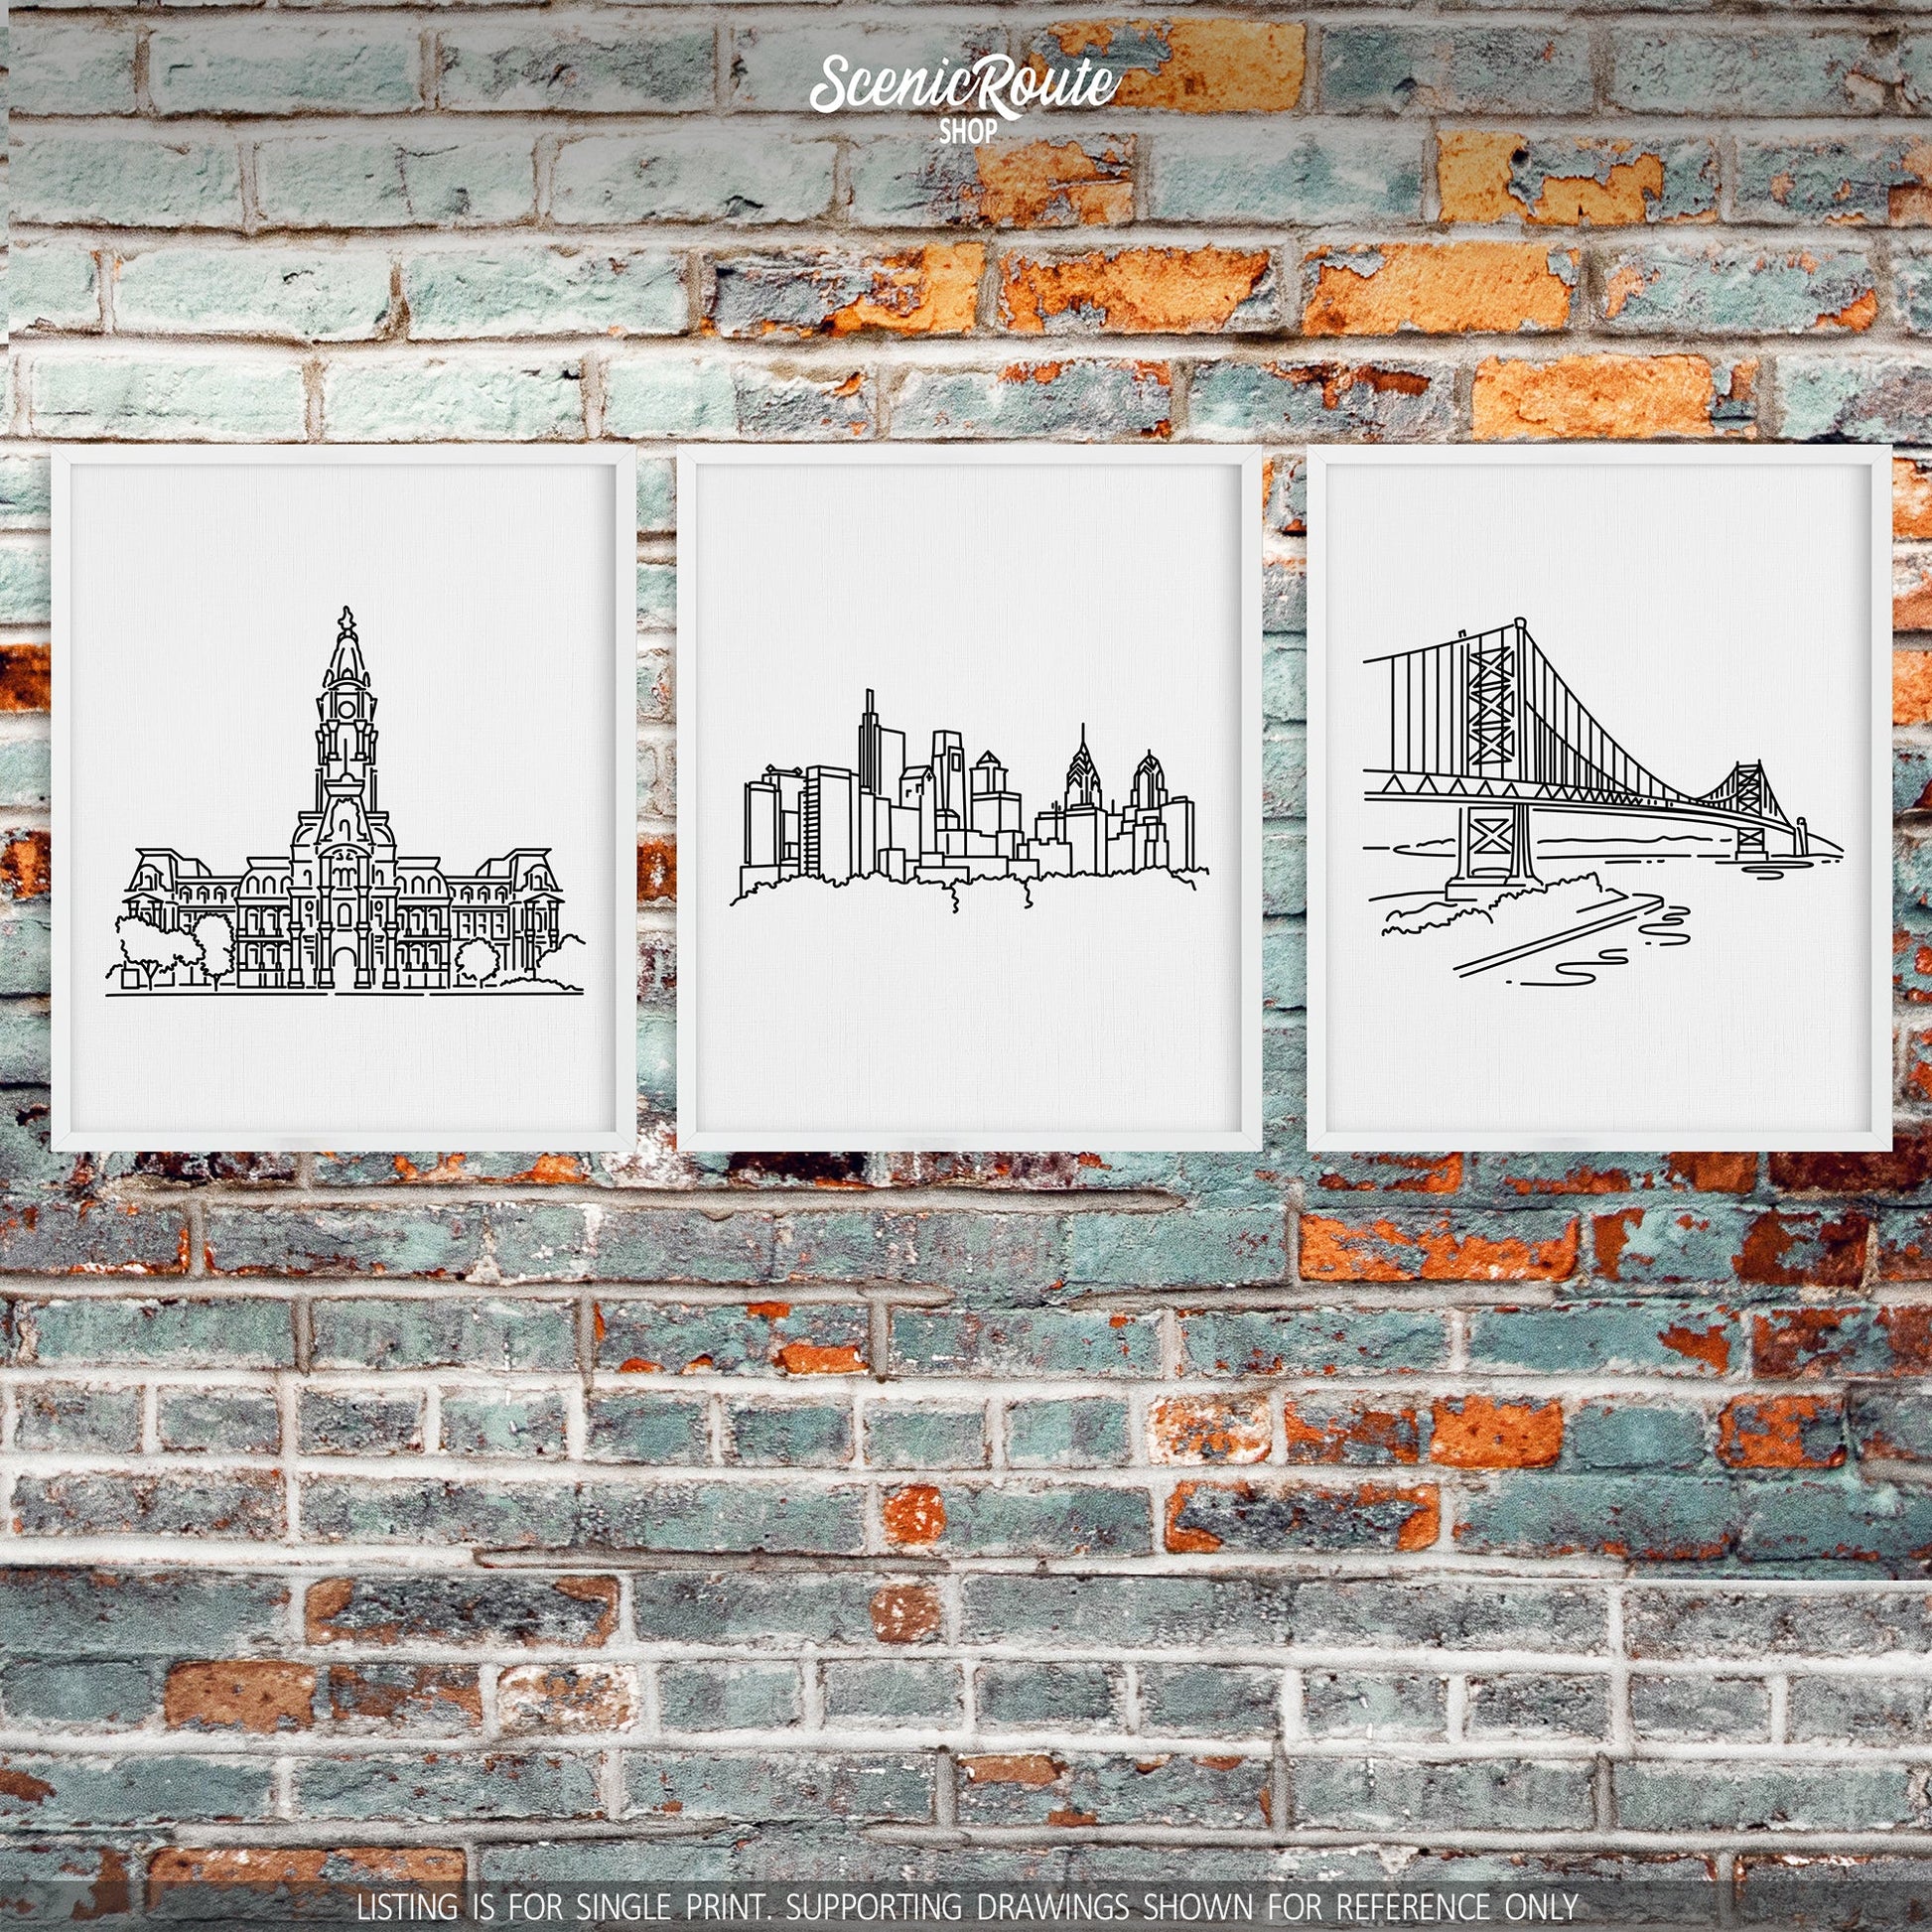 A group of three framed drawings on a brick wall. The line art drawings include the Philadelphia City Hall, Philadelphia Skyline, and Ben Franklin Bridge